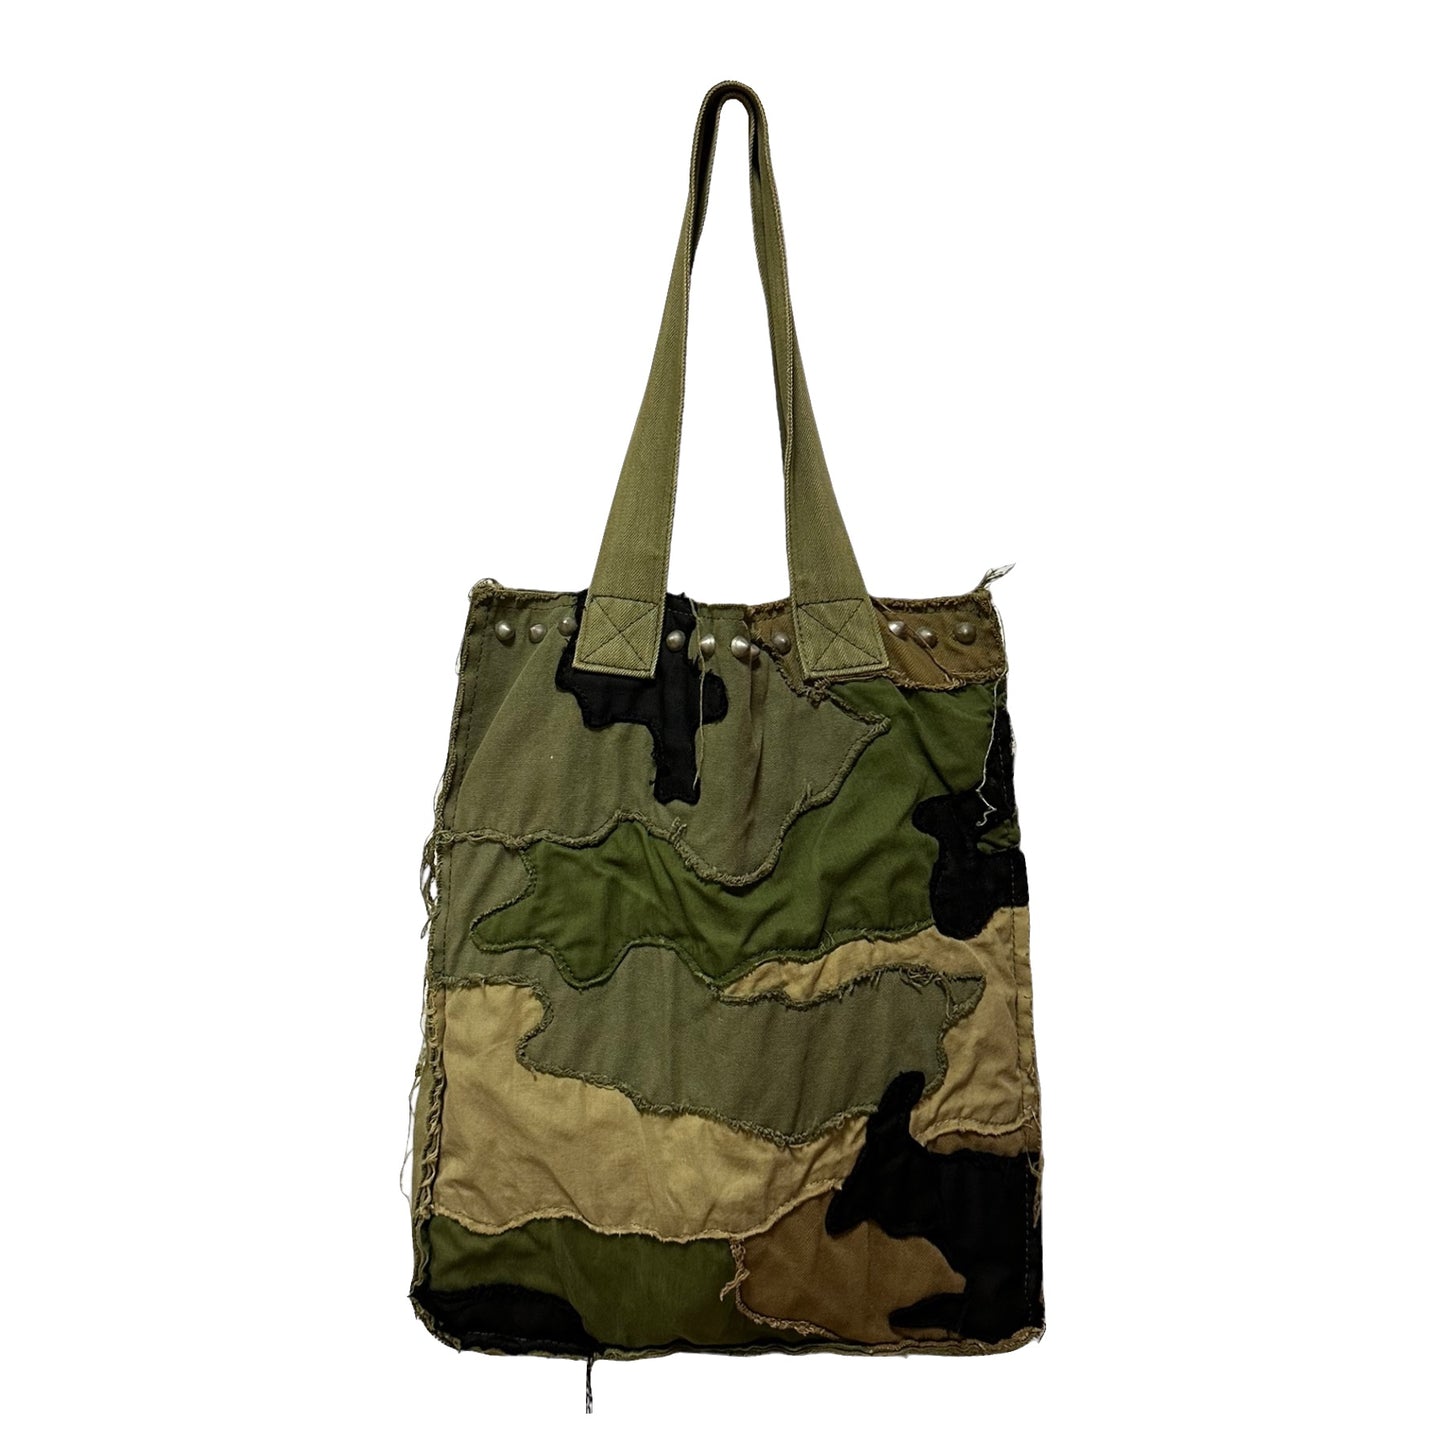 JUNYA WATANABE Fall Winter 2006 Studs Camouflage Patchwork Tote Bag